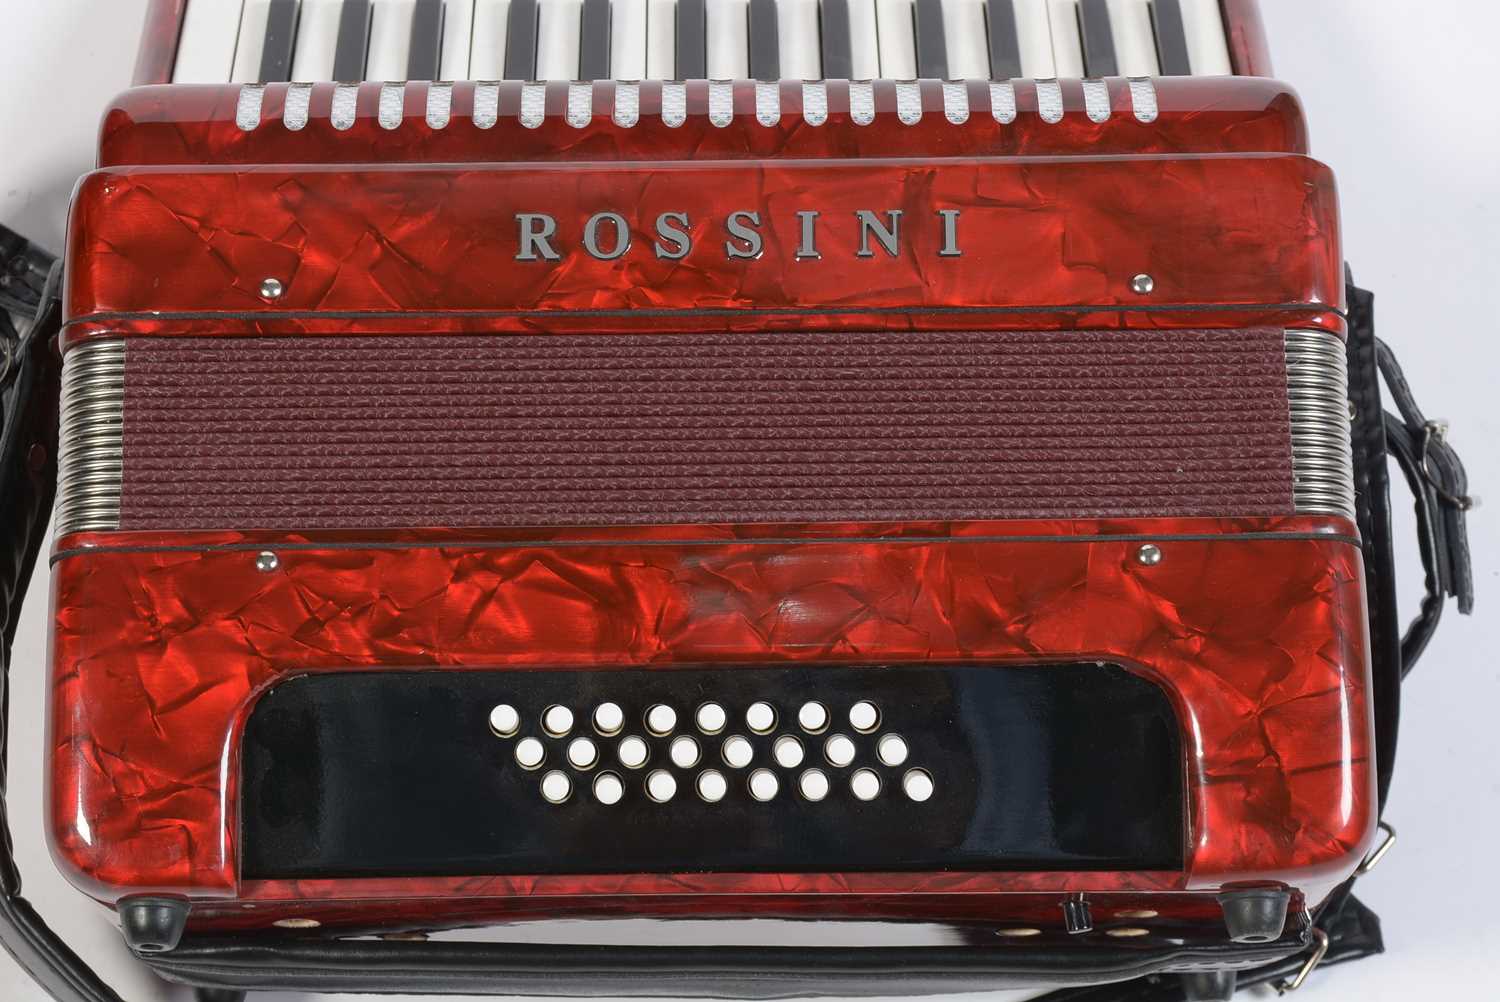 A Rossini 24 bass accordion - Image 7 of 9